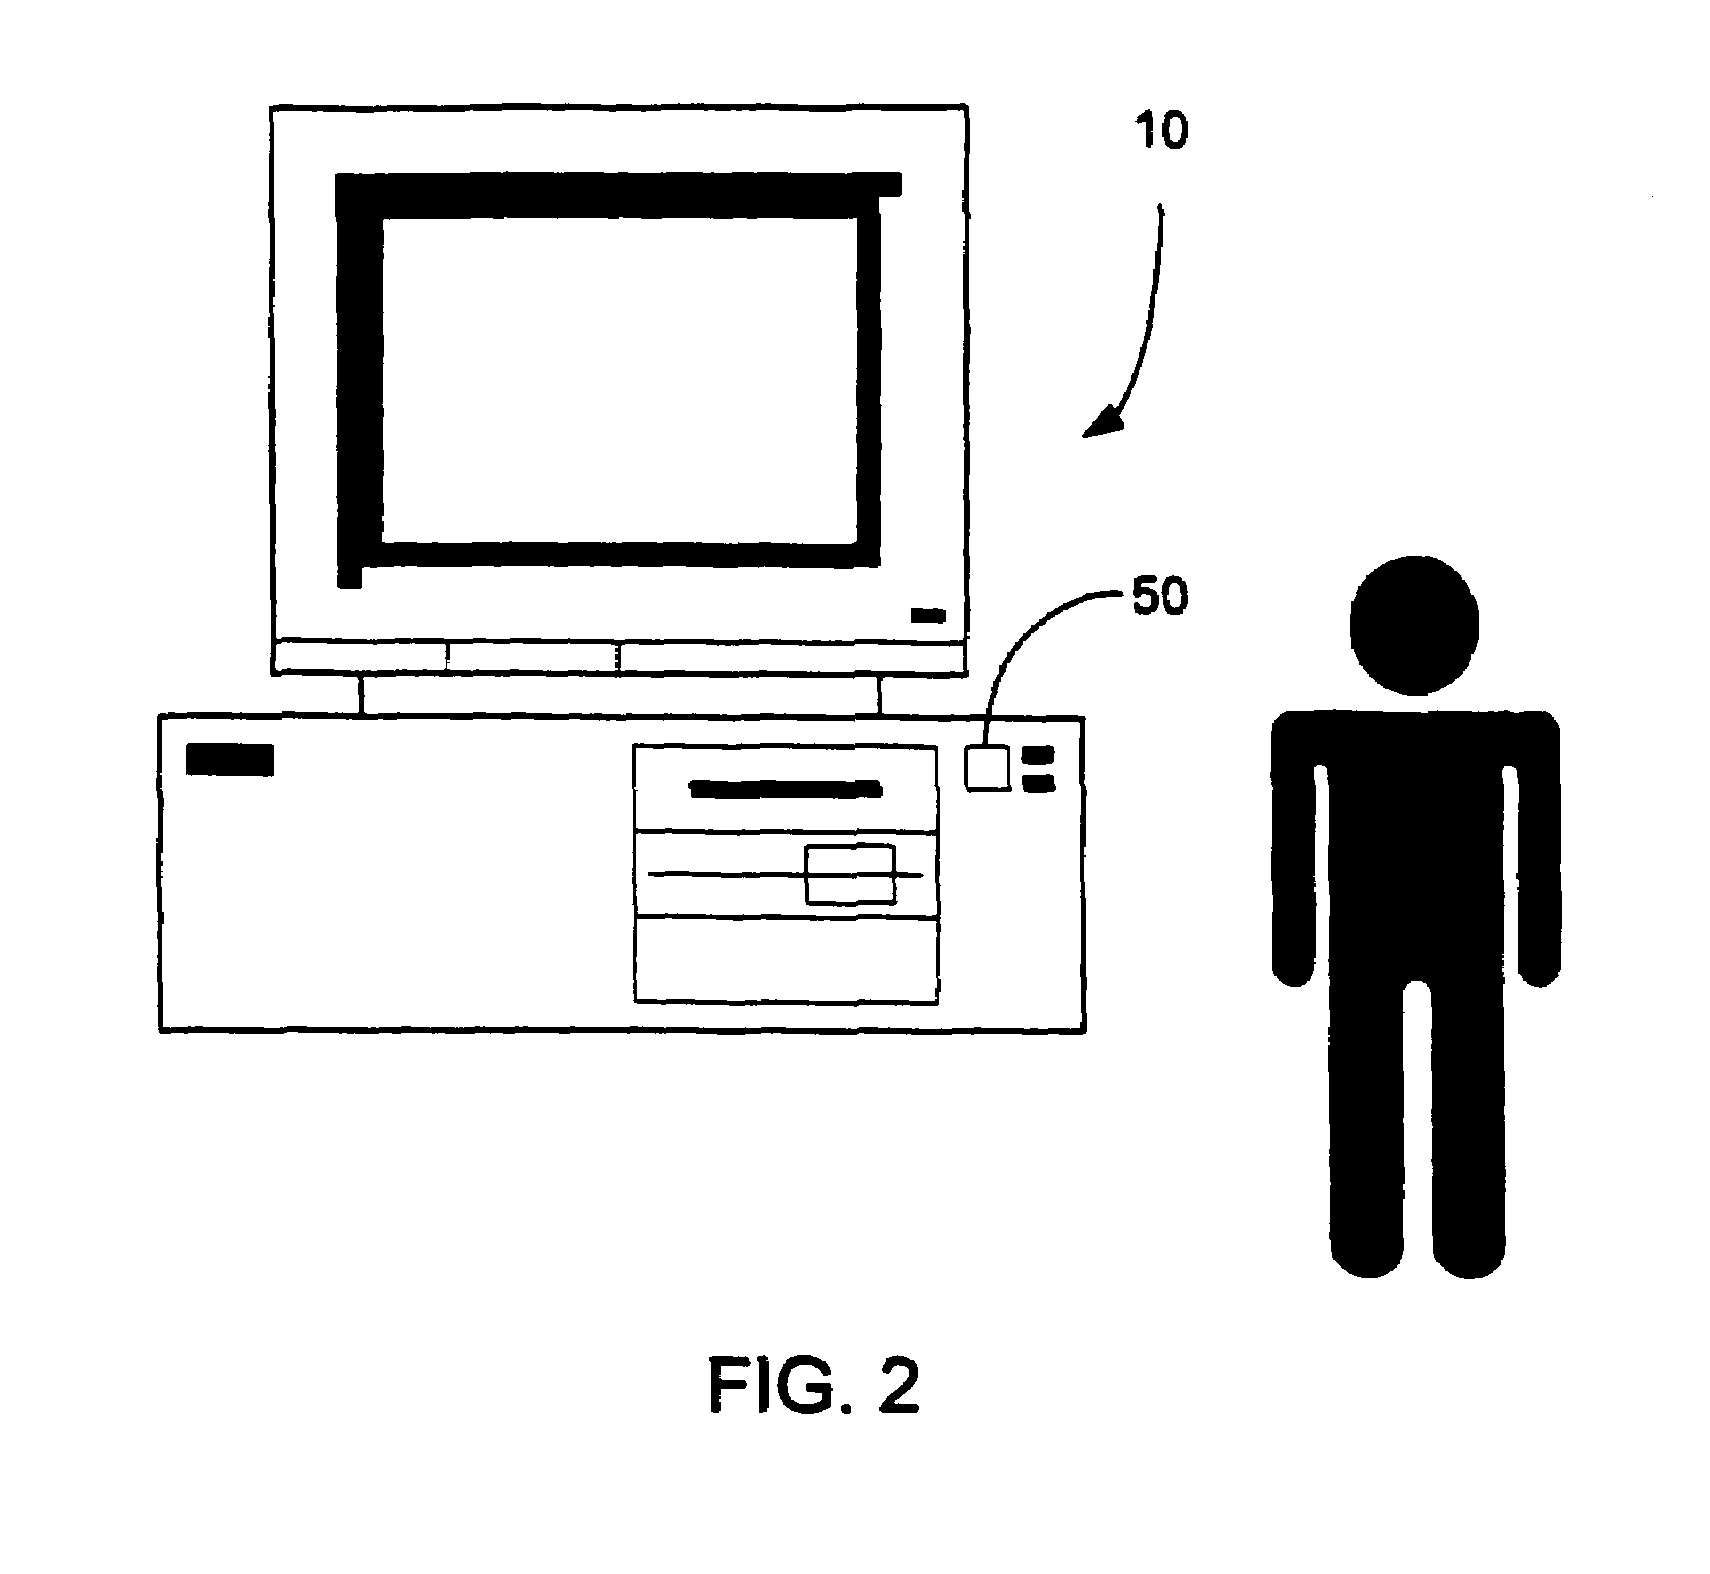 System and method for preserving state data of a personal computer in a standby state in the event of an AC power failure